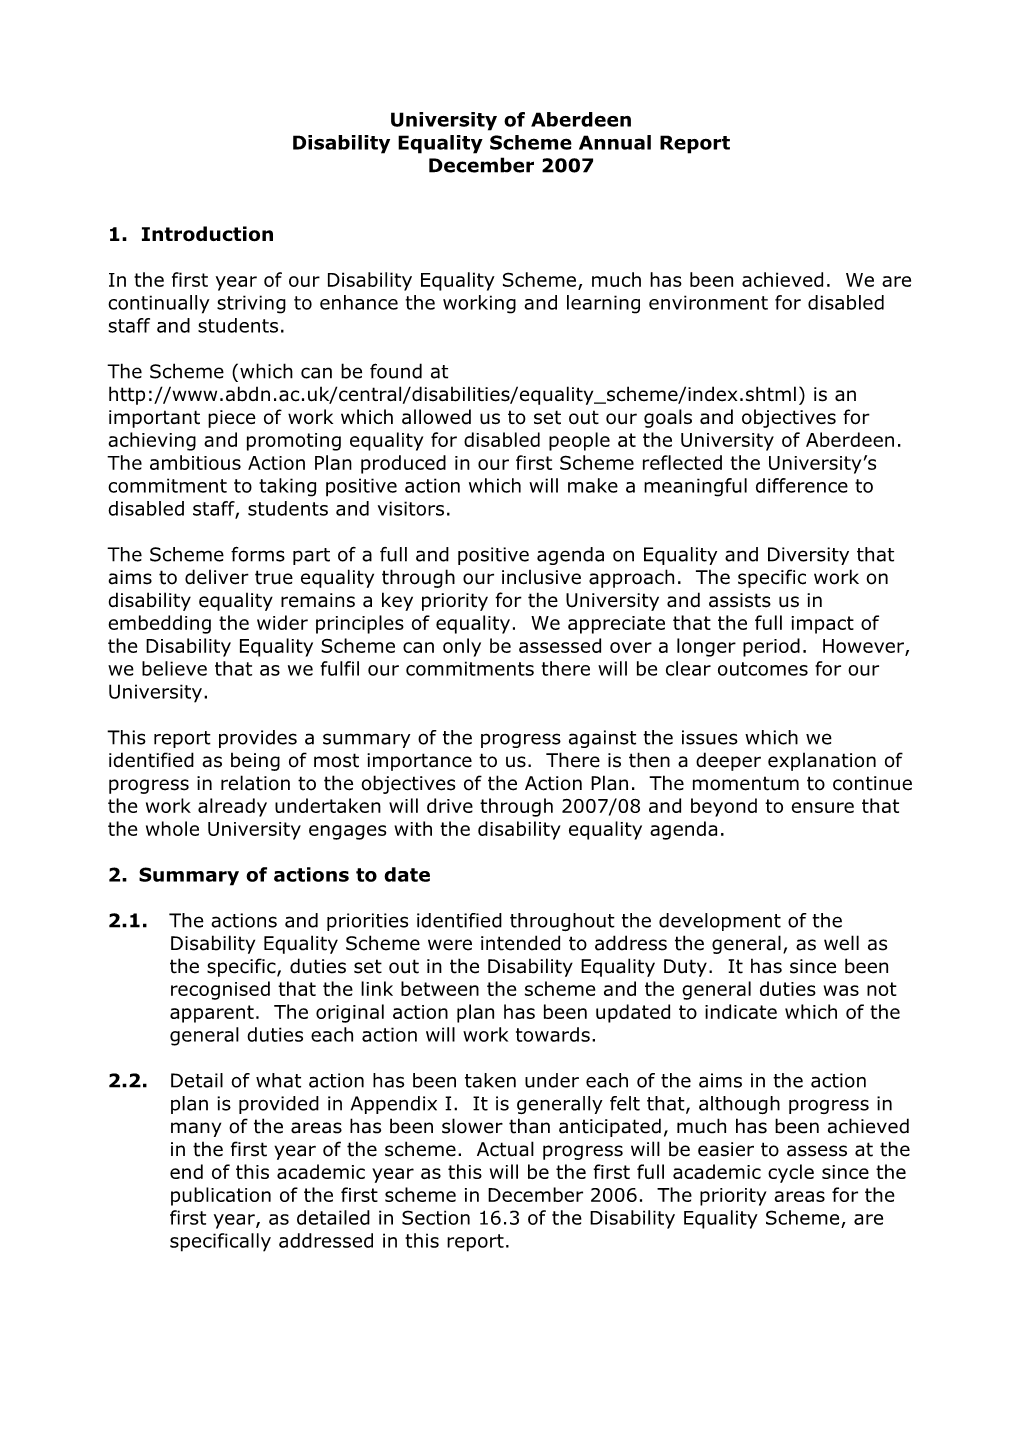 Disability Equality Scheme Annual Report December 2007